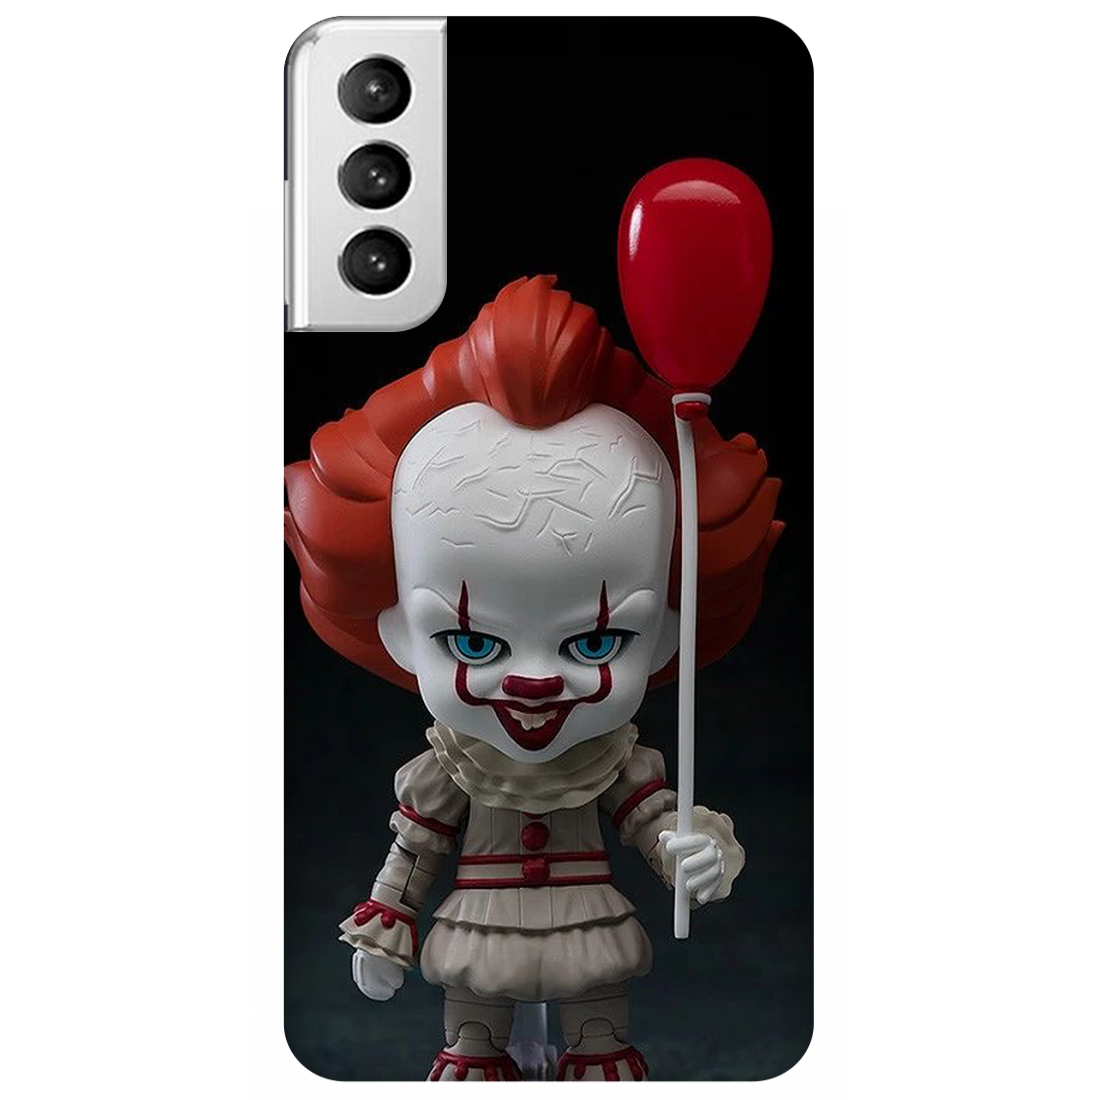 Pennywise Toy Figure Case Samsung Galaxy S21 Plus 5G